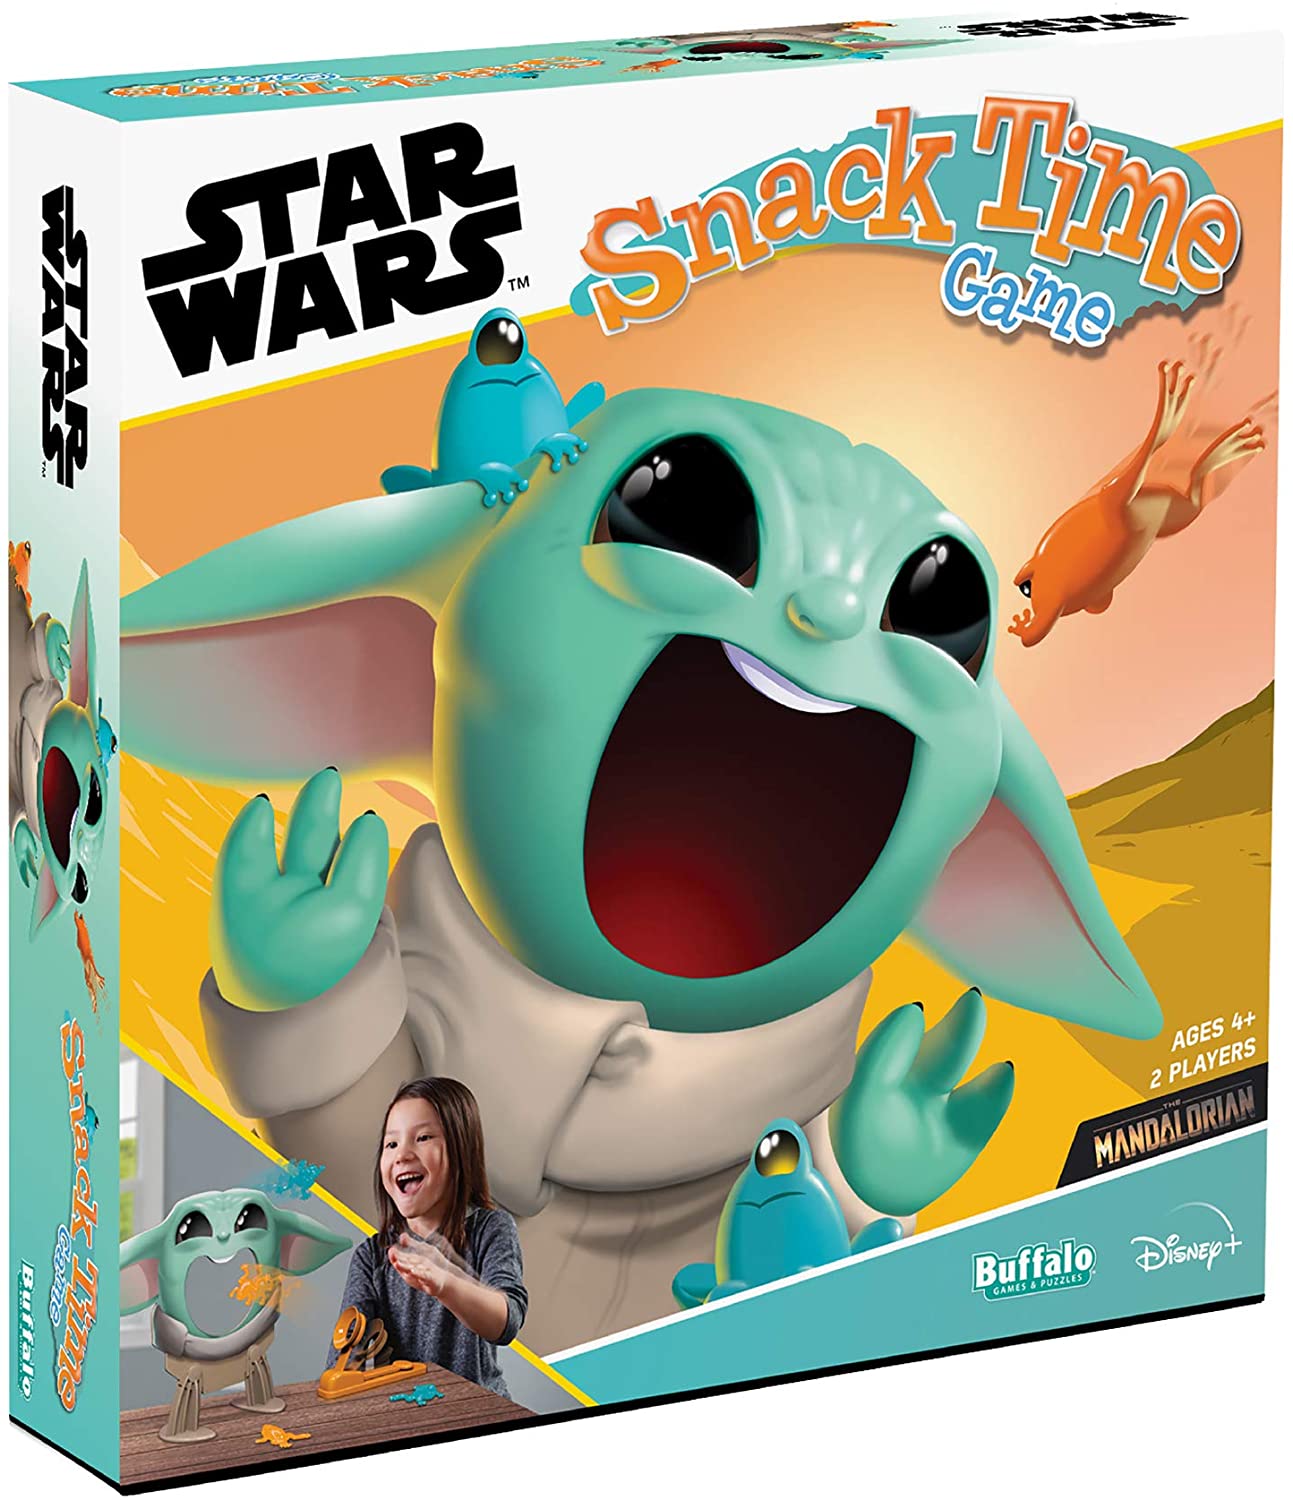 Buffalo Games Star Wars The Mandalorian Snack Time Game $10.50 + FS w/ Amazon Prime or FS on $25+